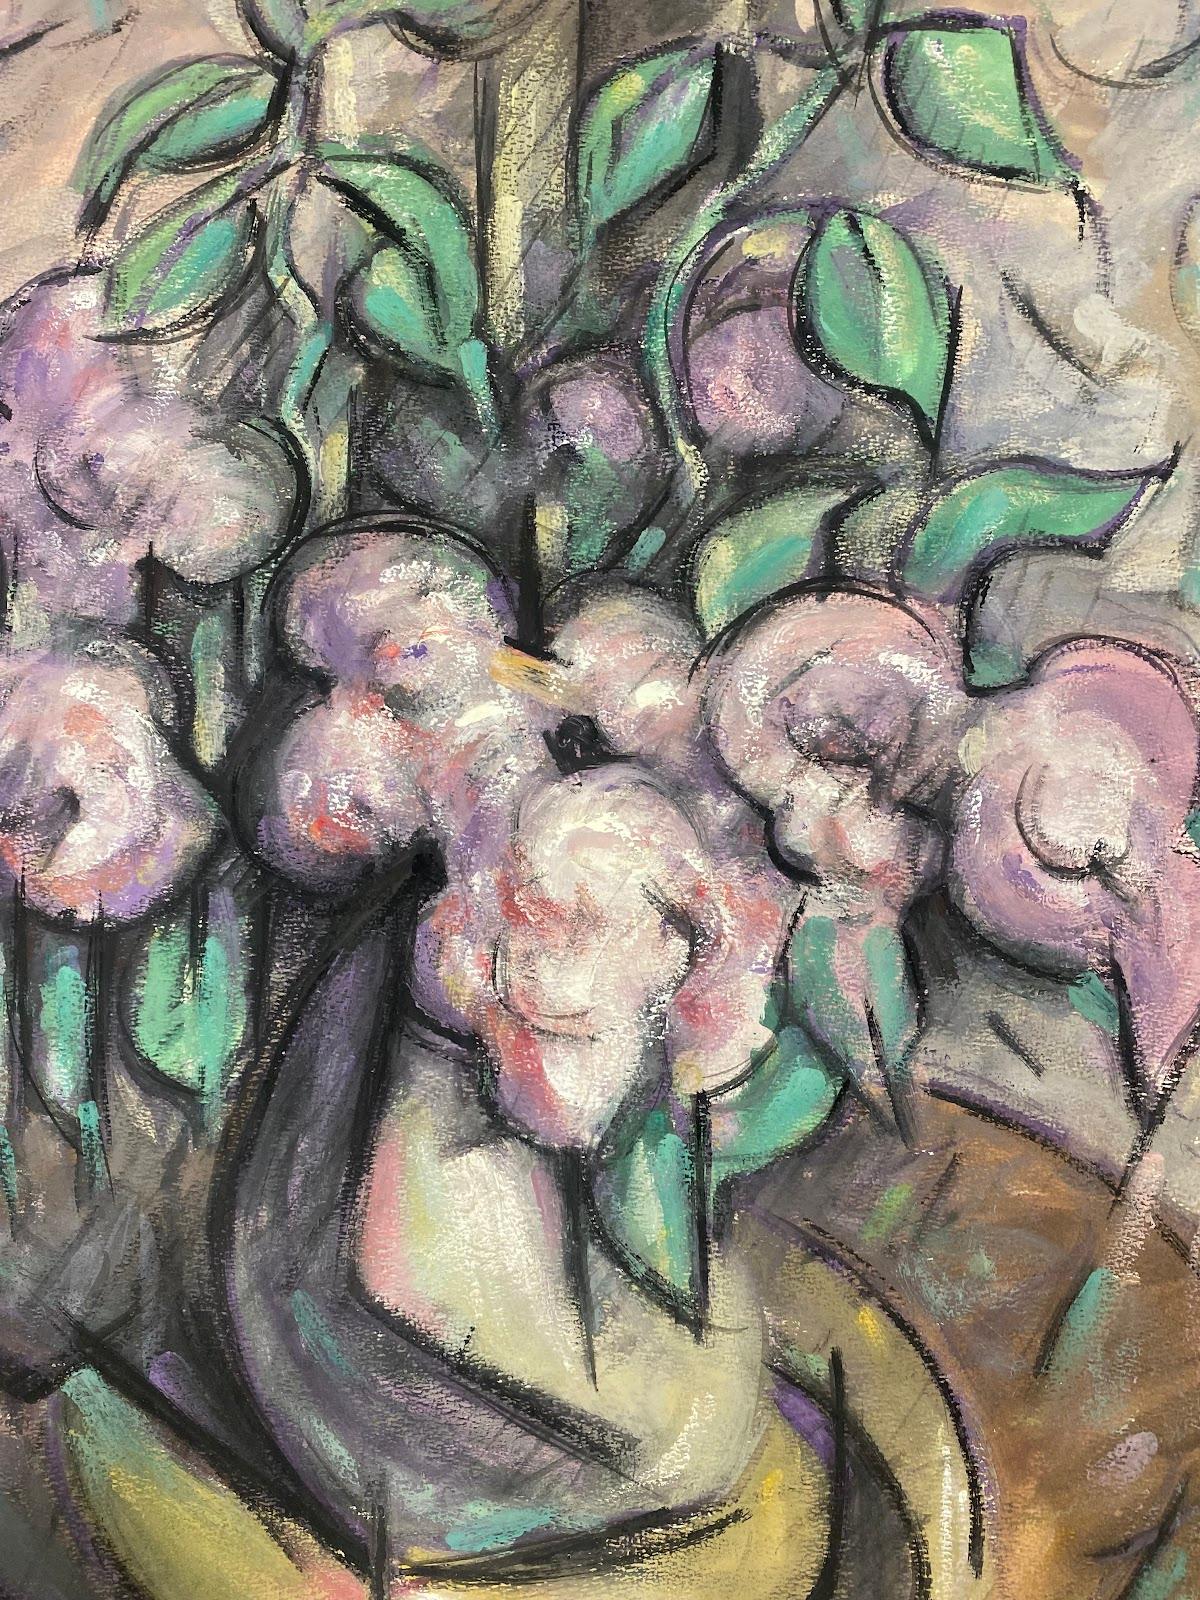 Interior with Flowers
by Paul-Louis Bolot (French 1918-2003)
signed
original gouache painting on thick paper/ card
unframed
condition: very good and sound; the edges have a few curls and scuffs/ edge tears which should all cover once flattened or